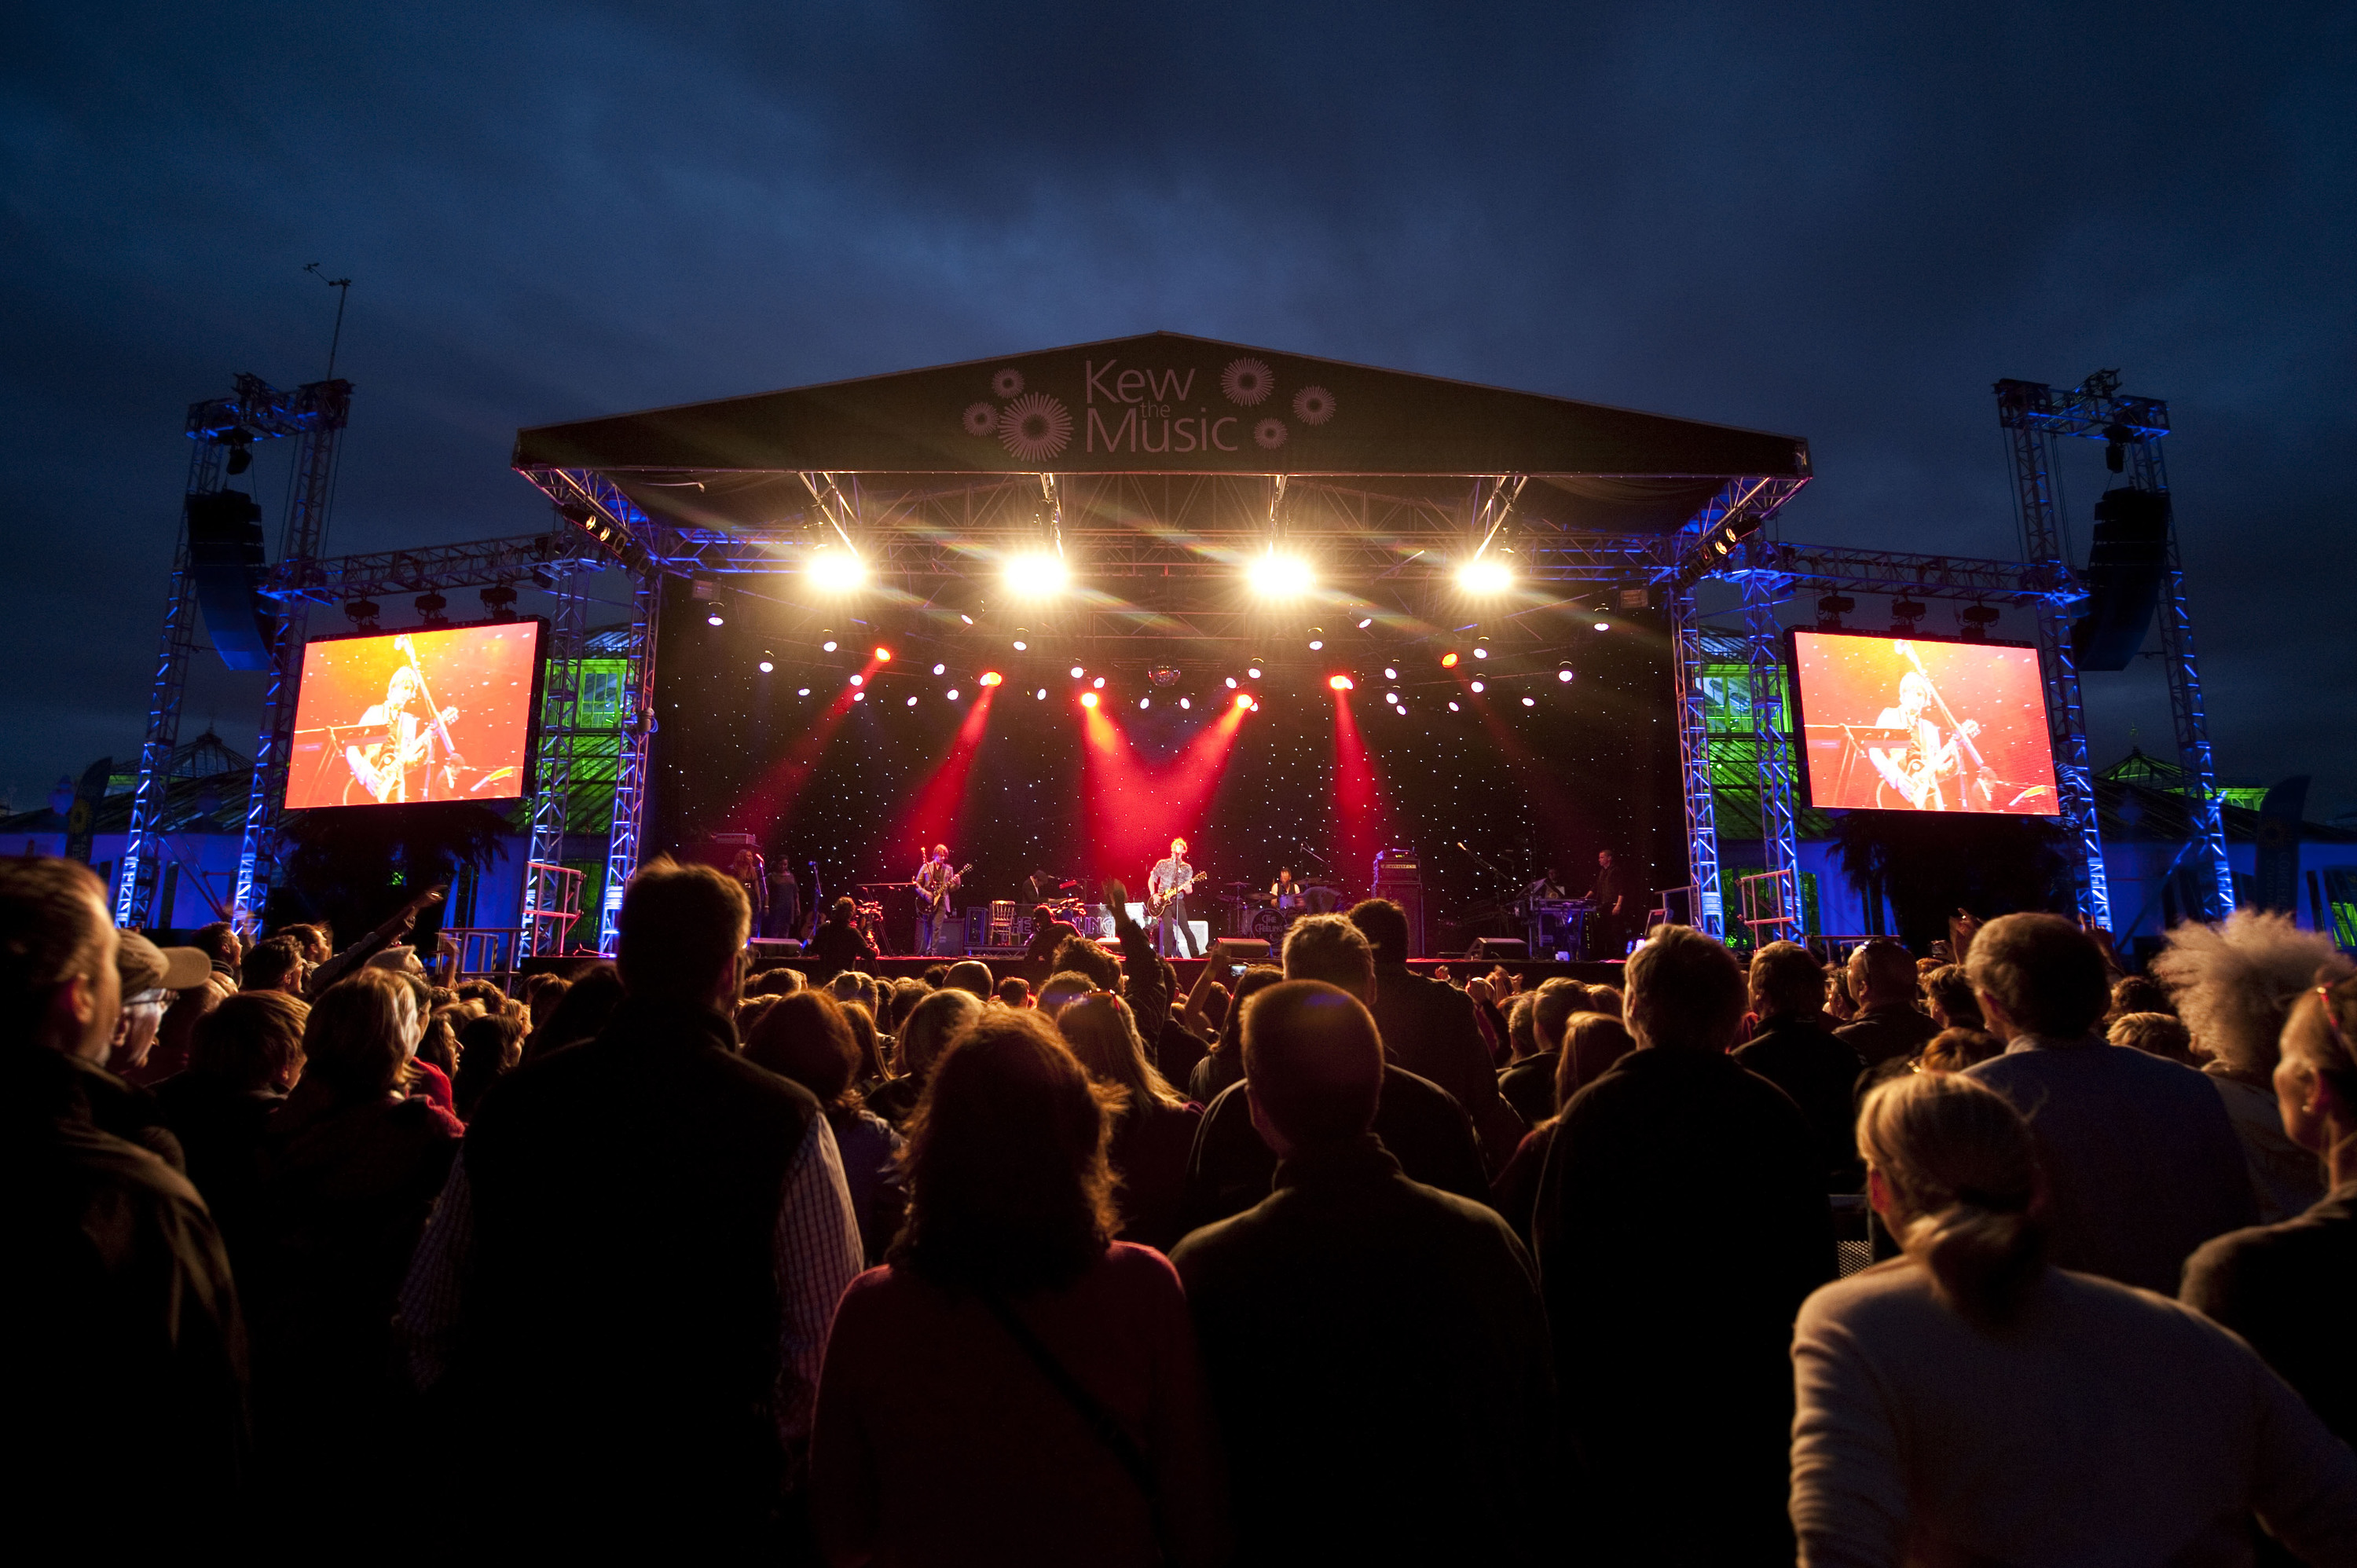 Outdoor gigs and open-air concerts in London